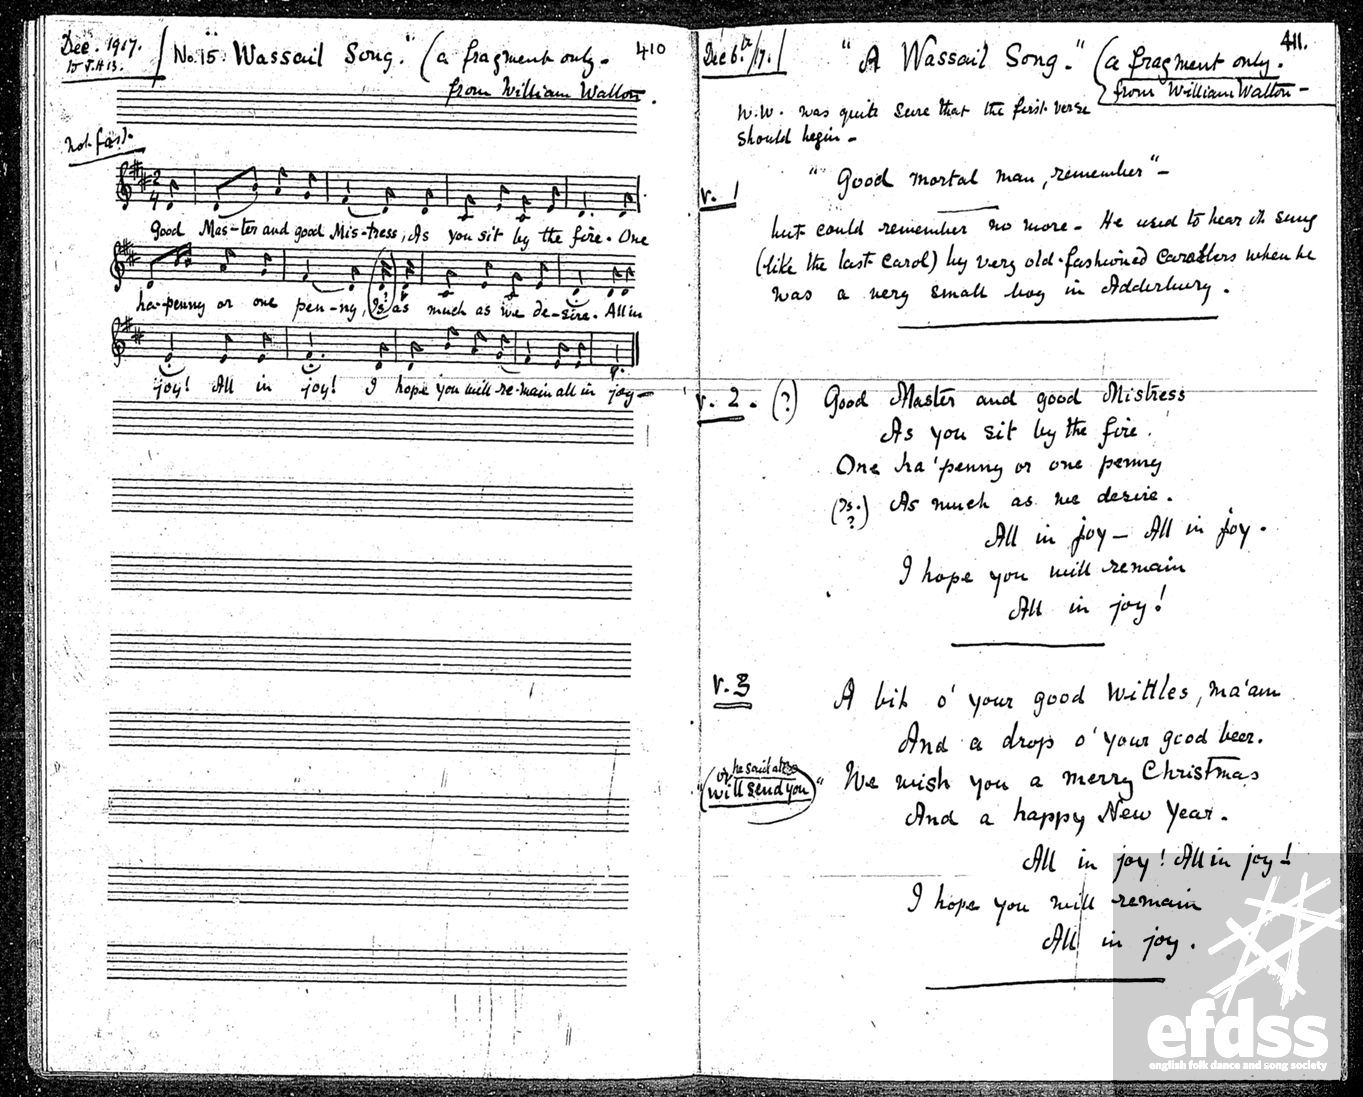 William Walton's Wassail Song, from the Janet Blunt MSS.